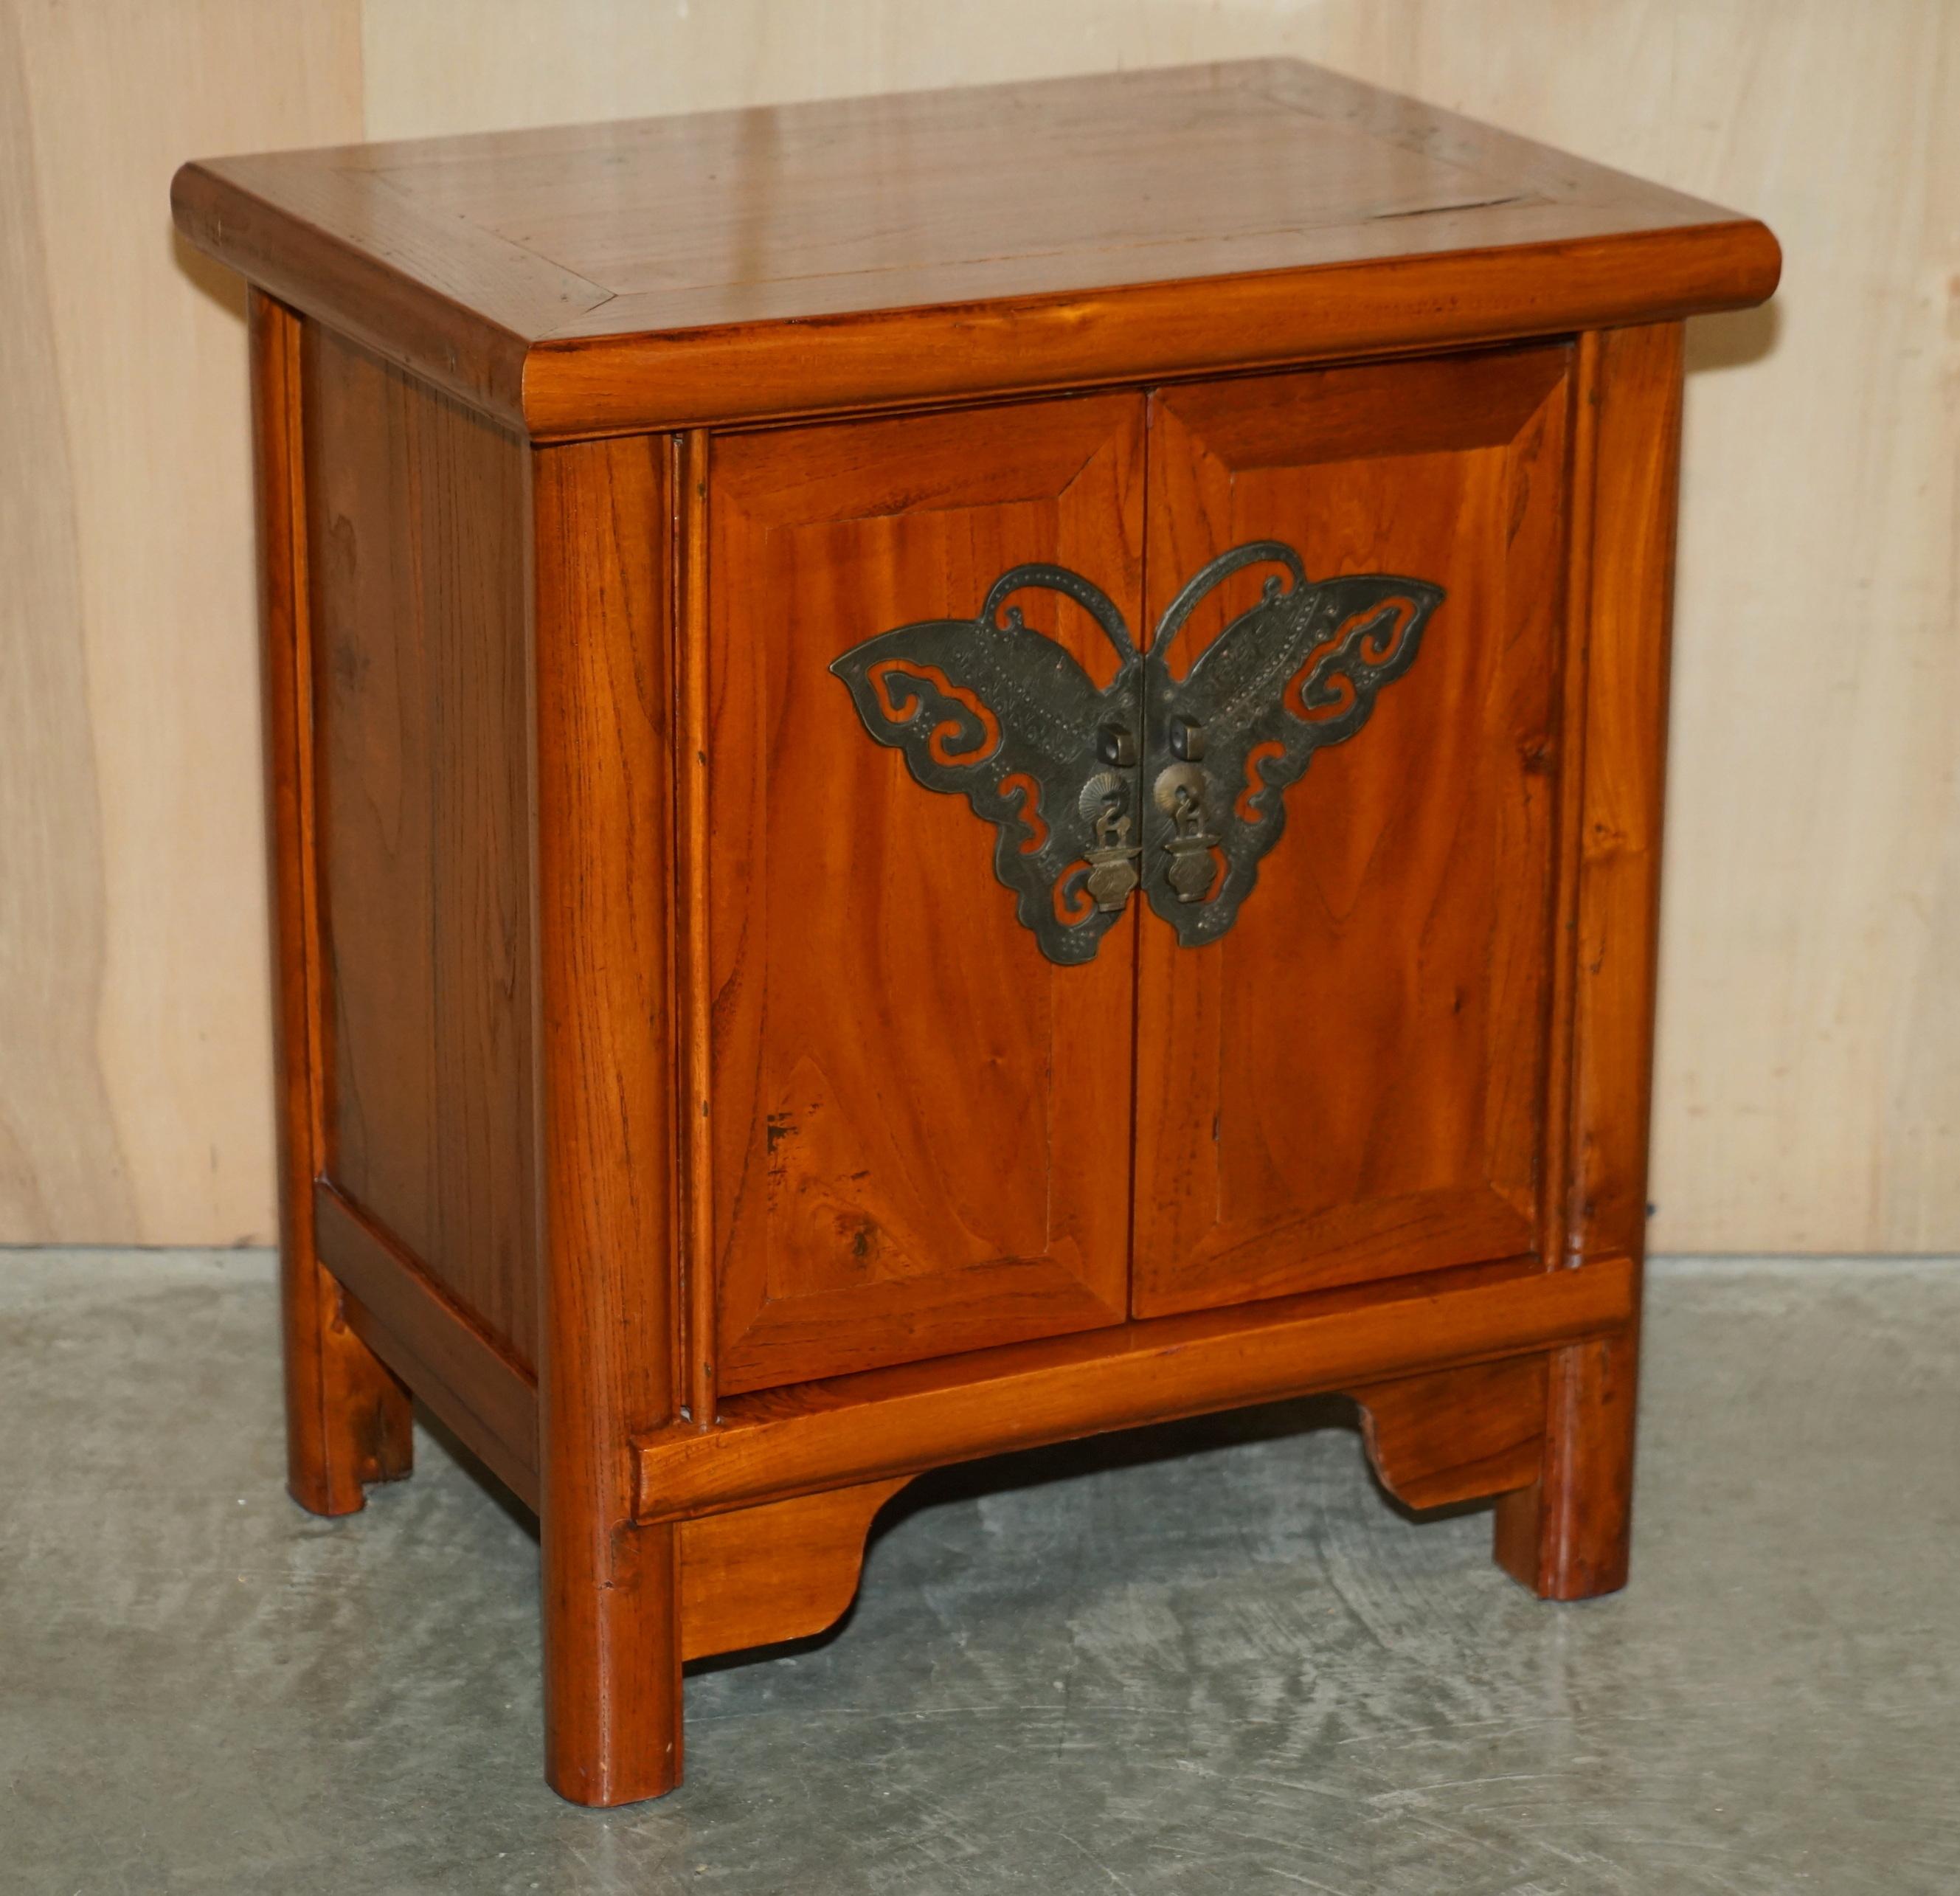 We are delighted to offer for sale this lovely pair of Chinese elm side table cabinets with oversized brass butterfly doors 

A very good looking well made and decorative pair, the finish is exquisite, they look expensive, important and